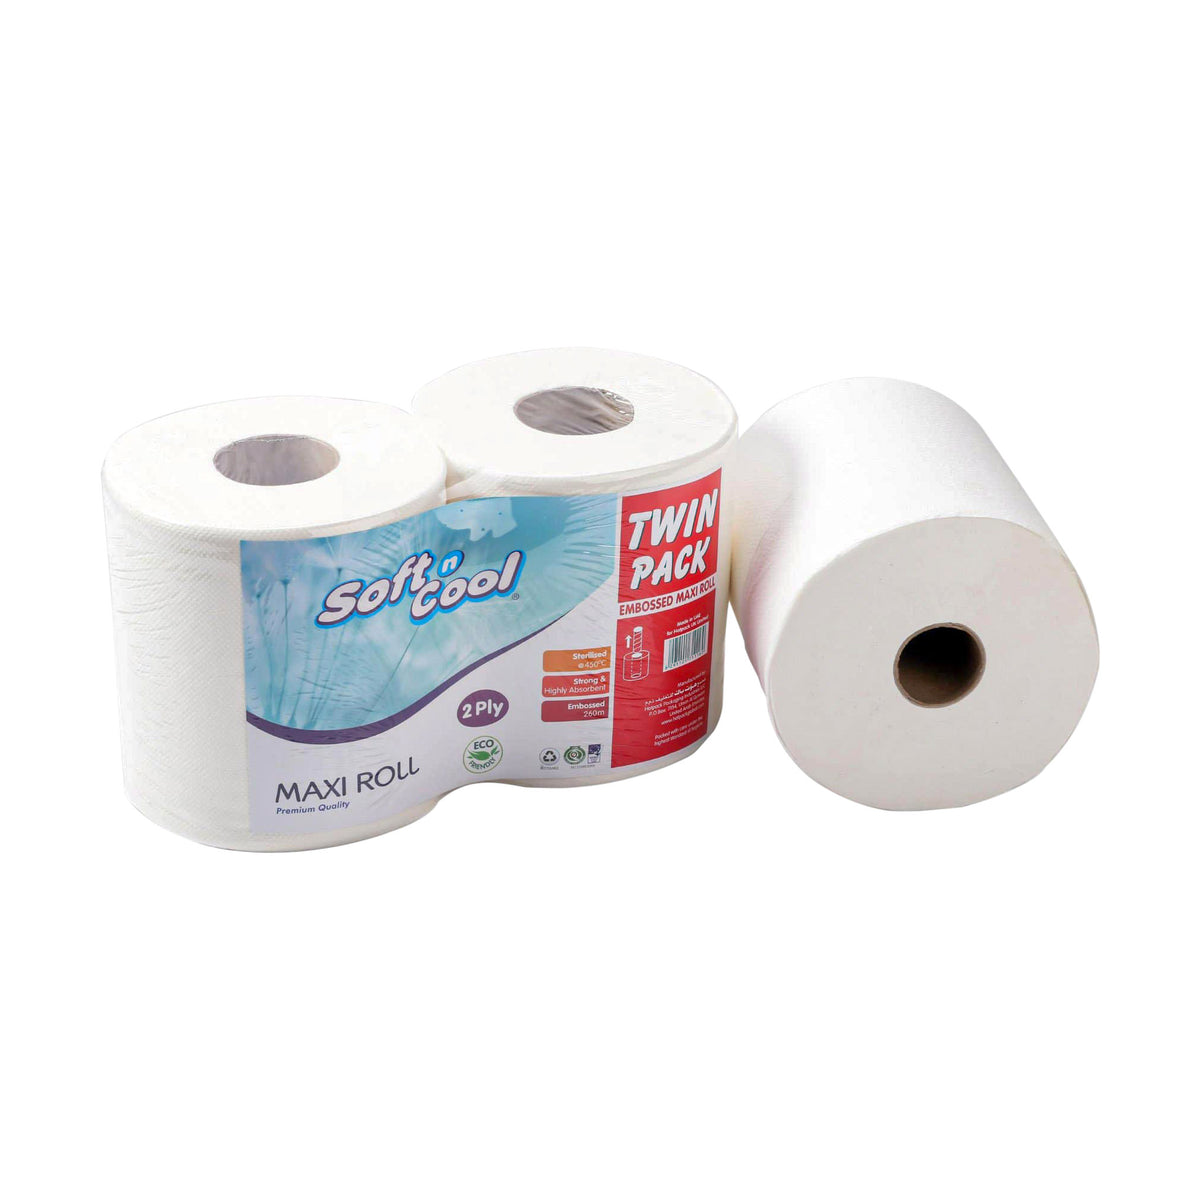 Soft n Cool Twin Pack Maxi Roll Twin Pack 2 Ply 260 Meter 2 Rolls - Hotpack Global